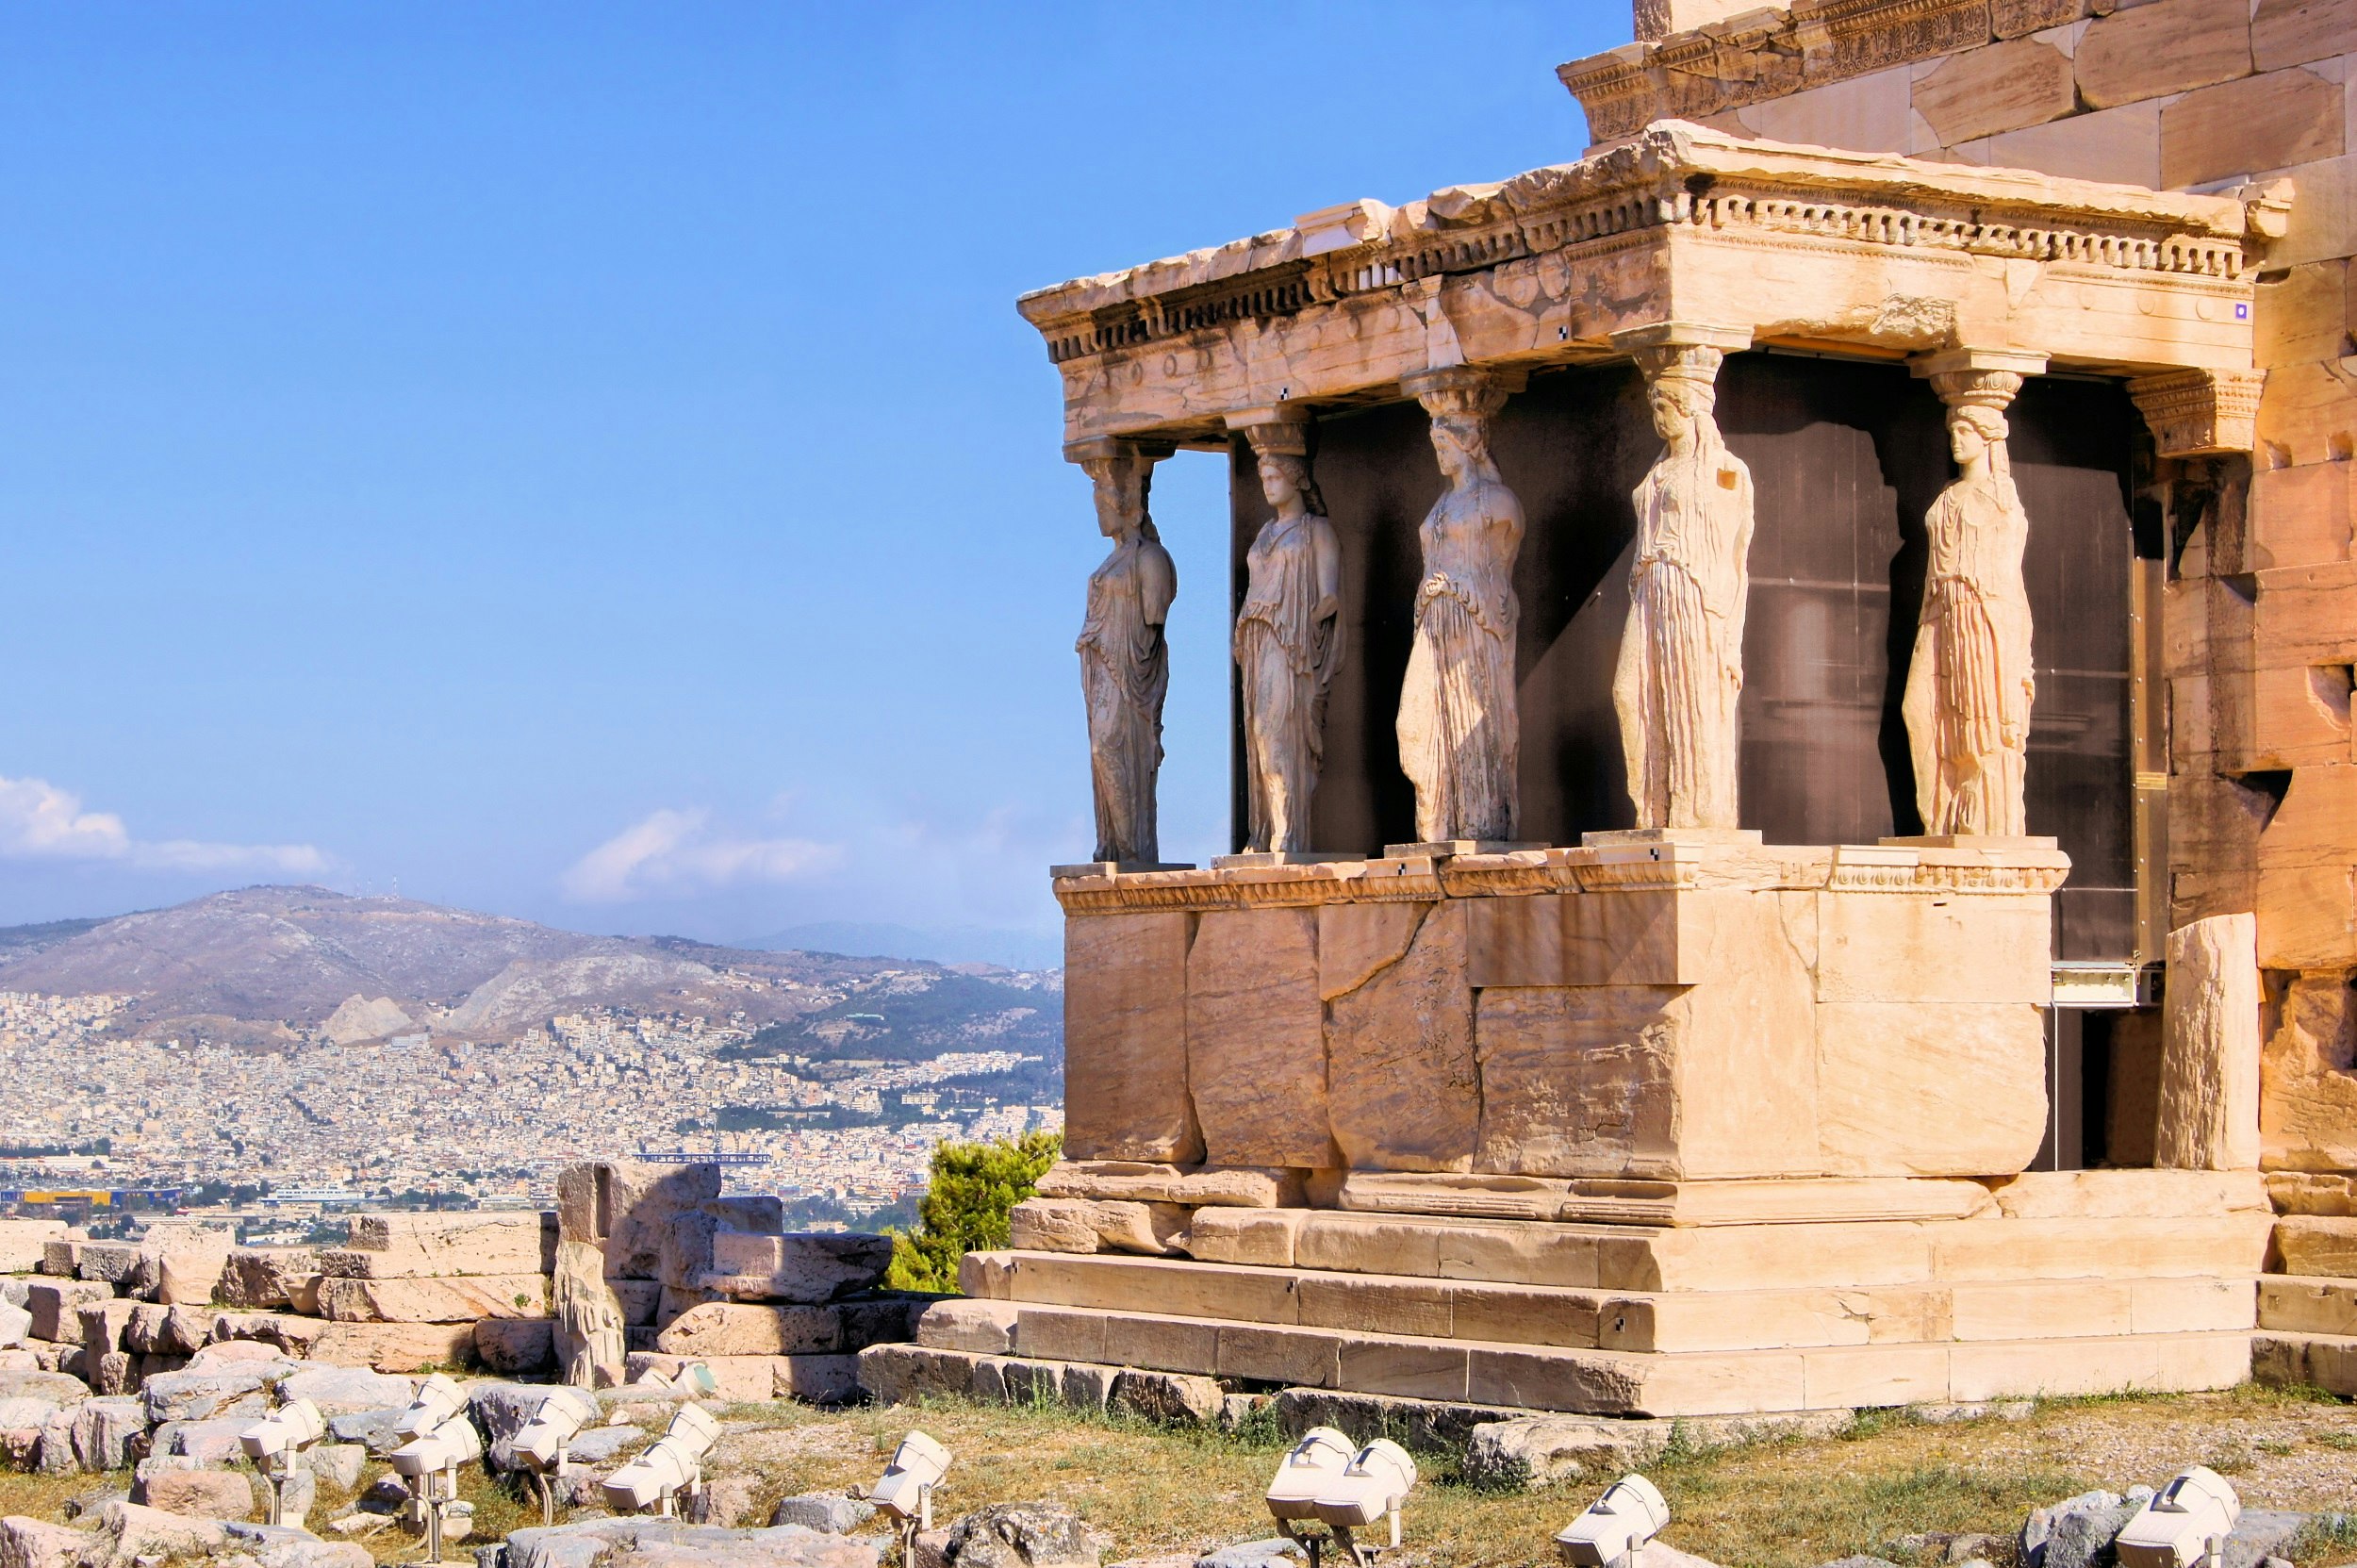 A Greek temple building with large stone female figures acting as columns supporting the large roof structure